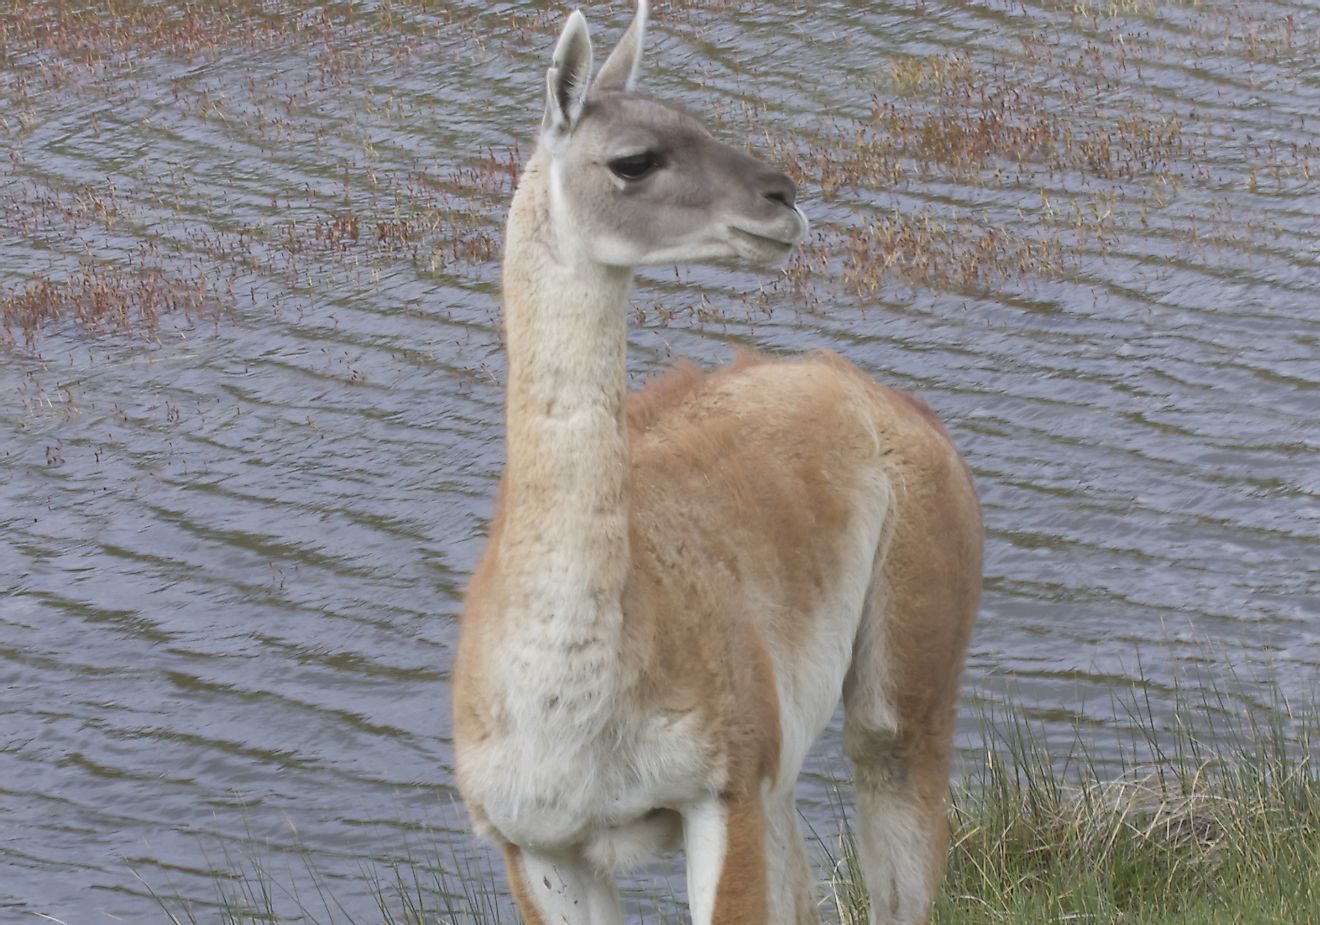 A Guanaco stands by the waterside in the Patagonian steppes of Chile.